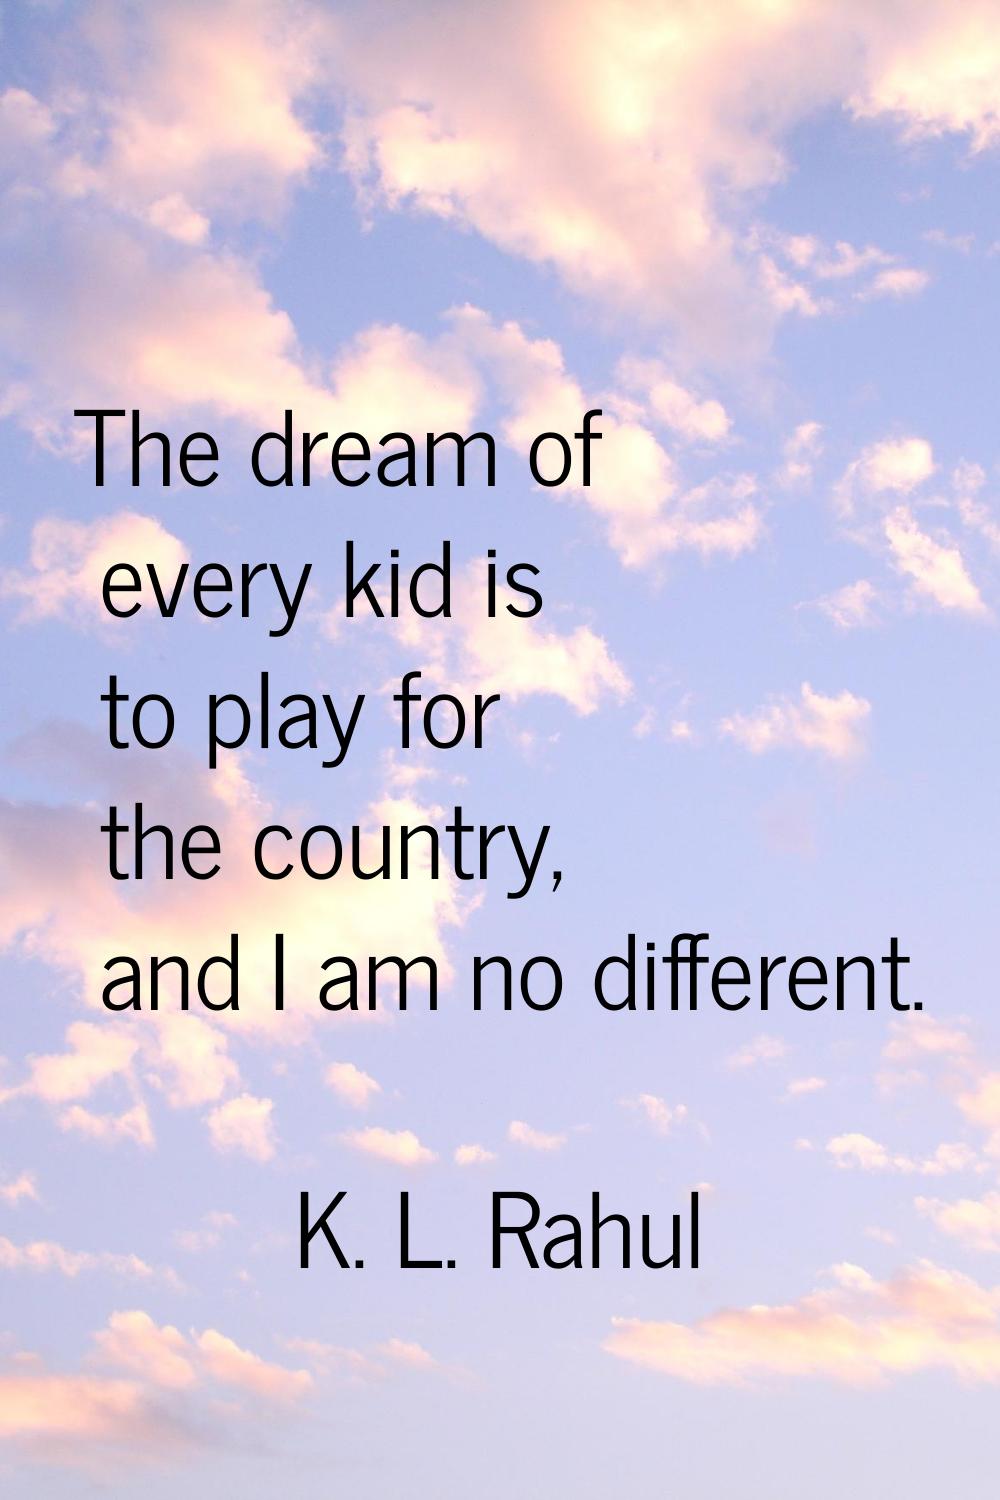 The dream of every kid is to play for the country, and I am no different.